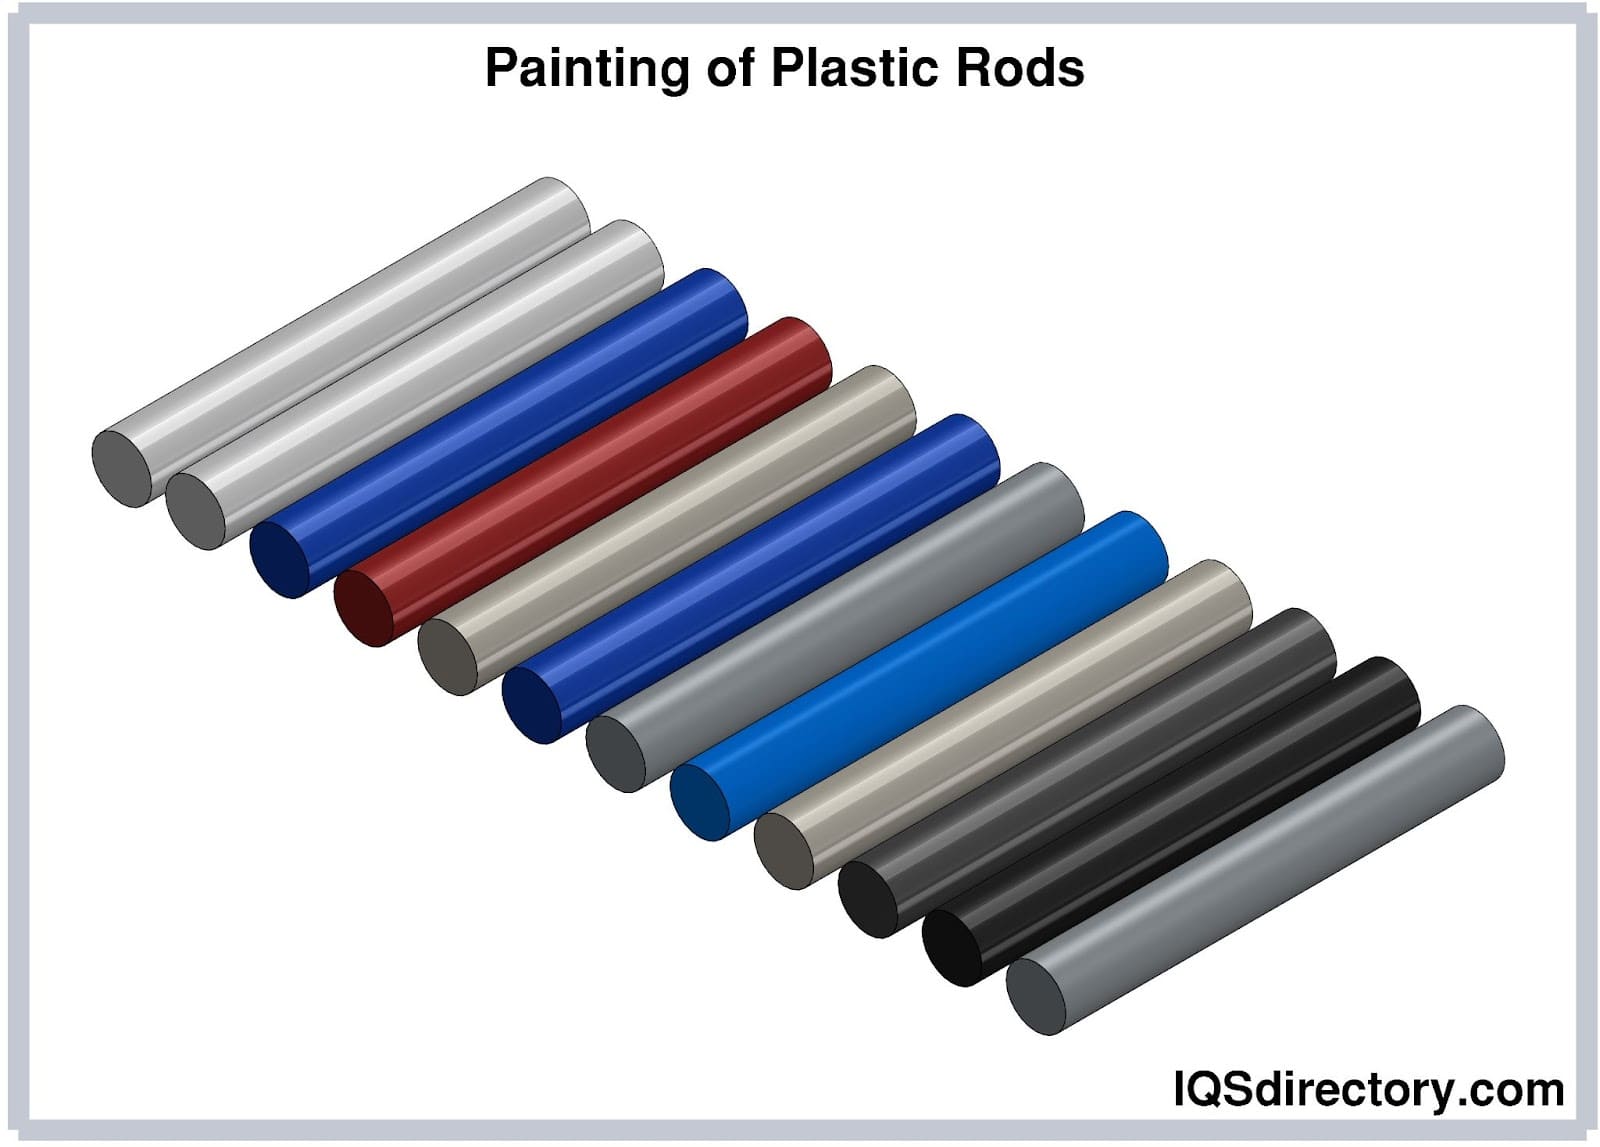 Painting of Plastic Rods